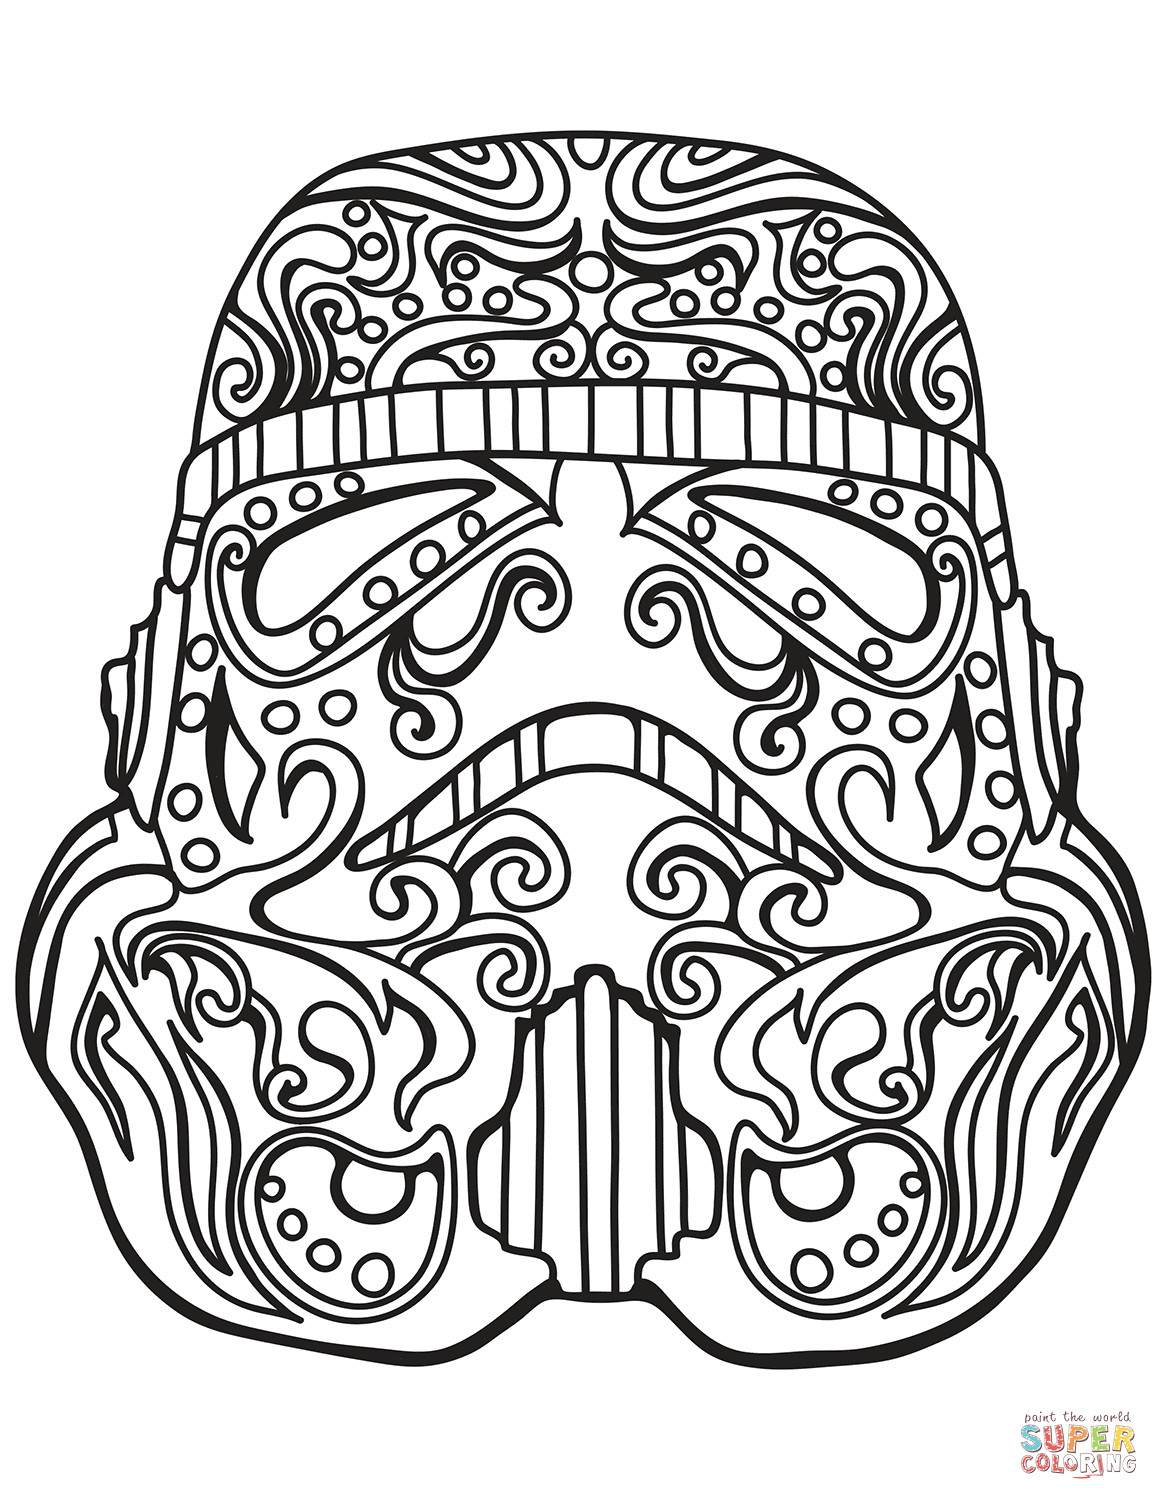 Star Wars Adult Coloring Pages
 Star Wars Stormtrooper Sugar Skull coloring page